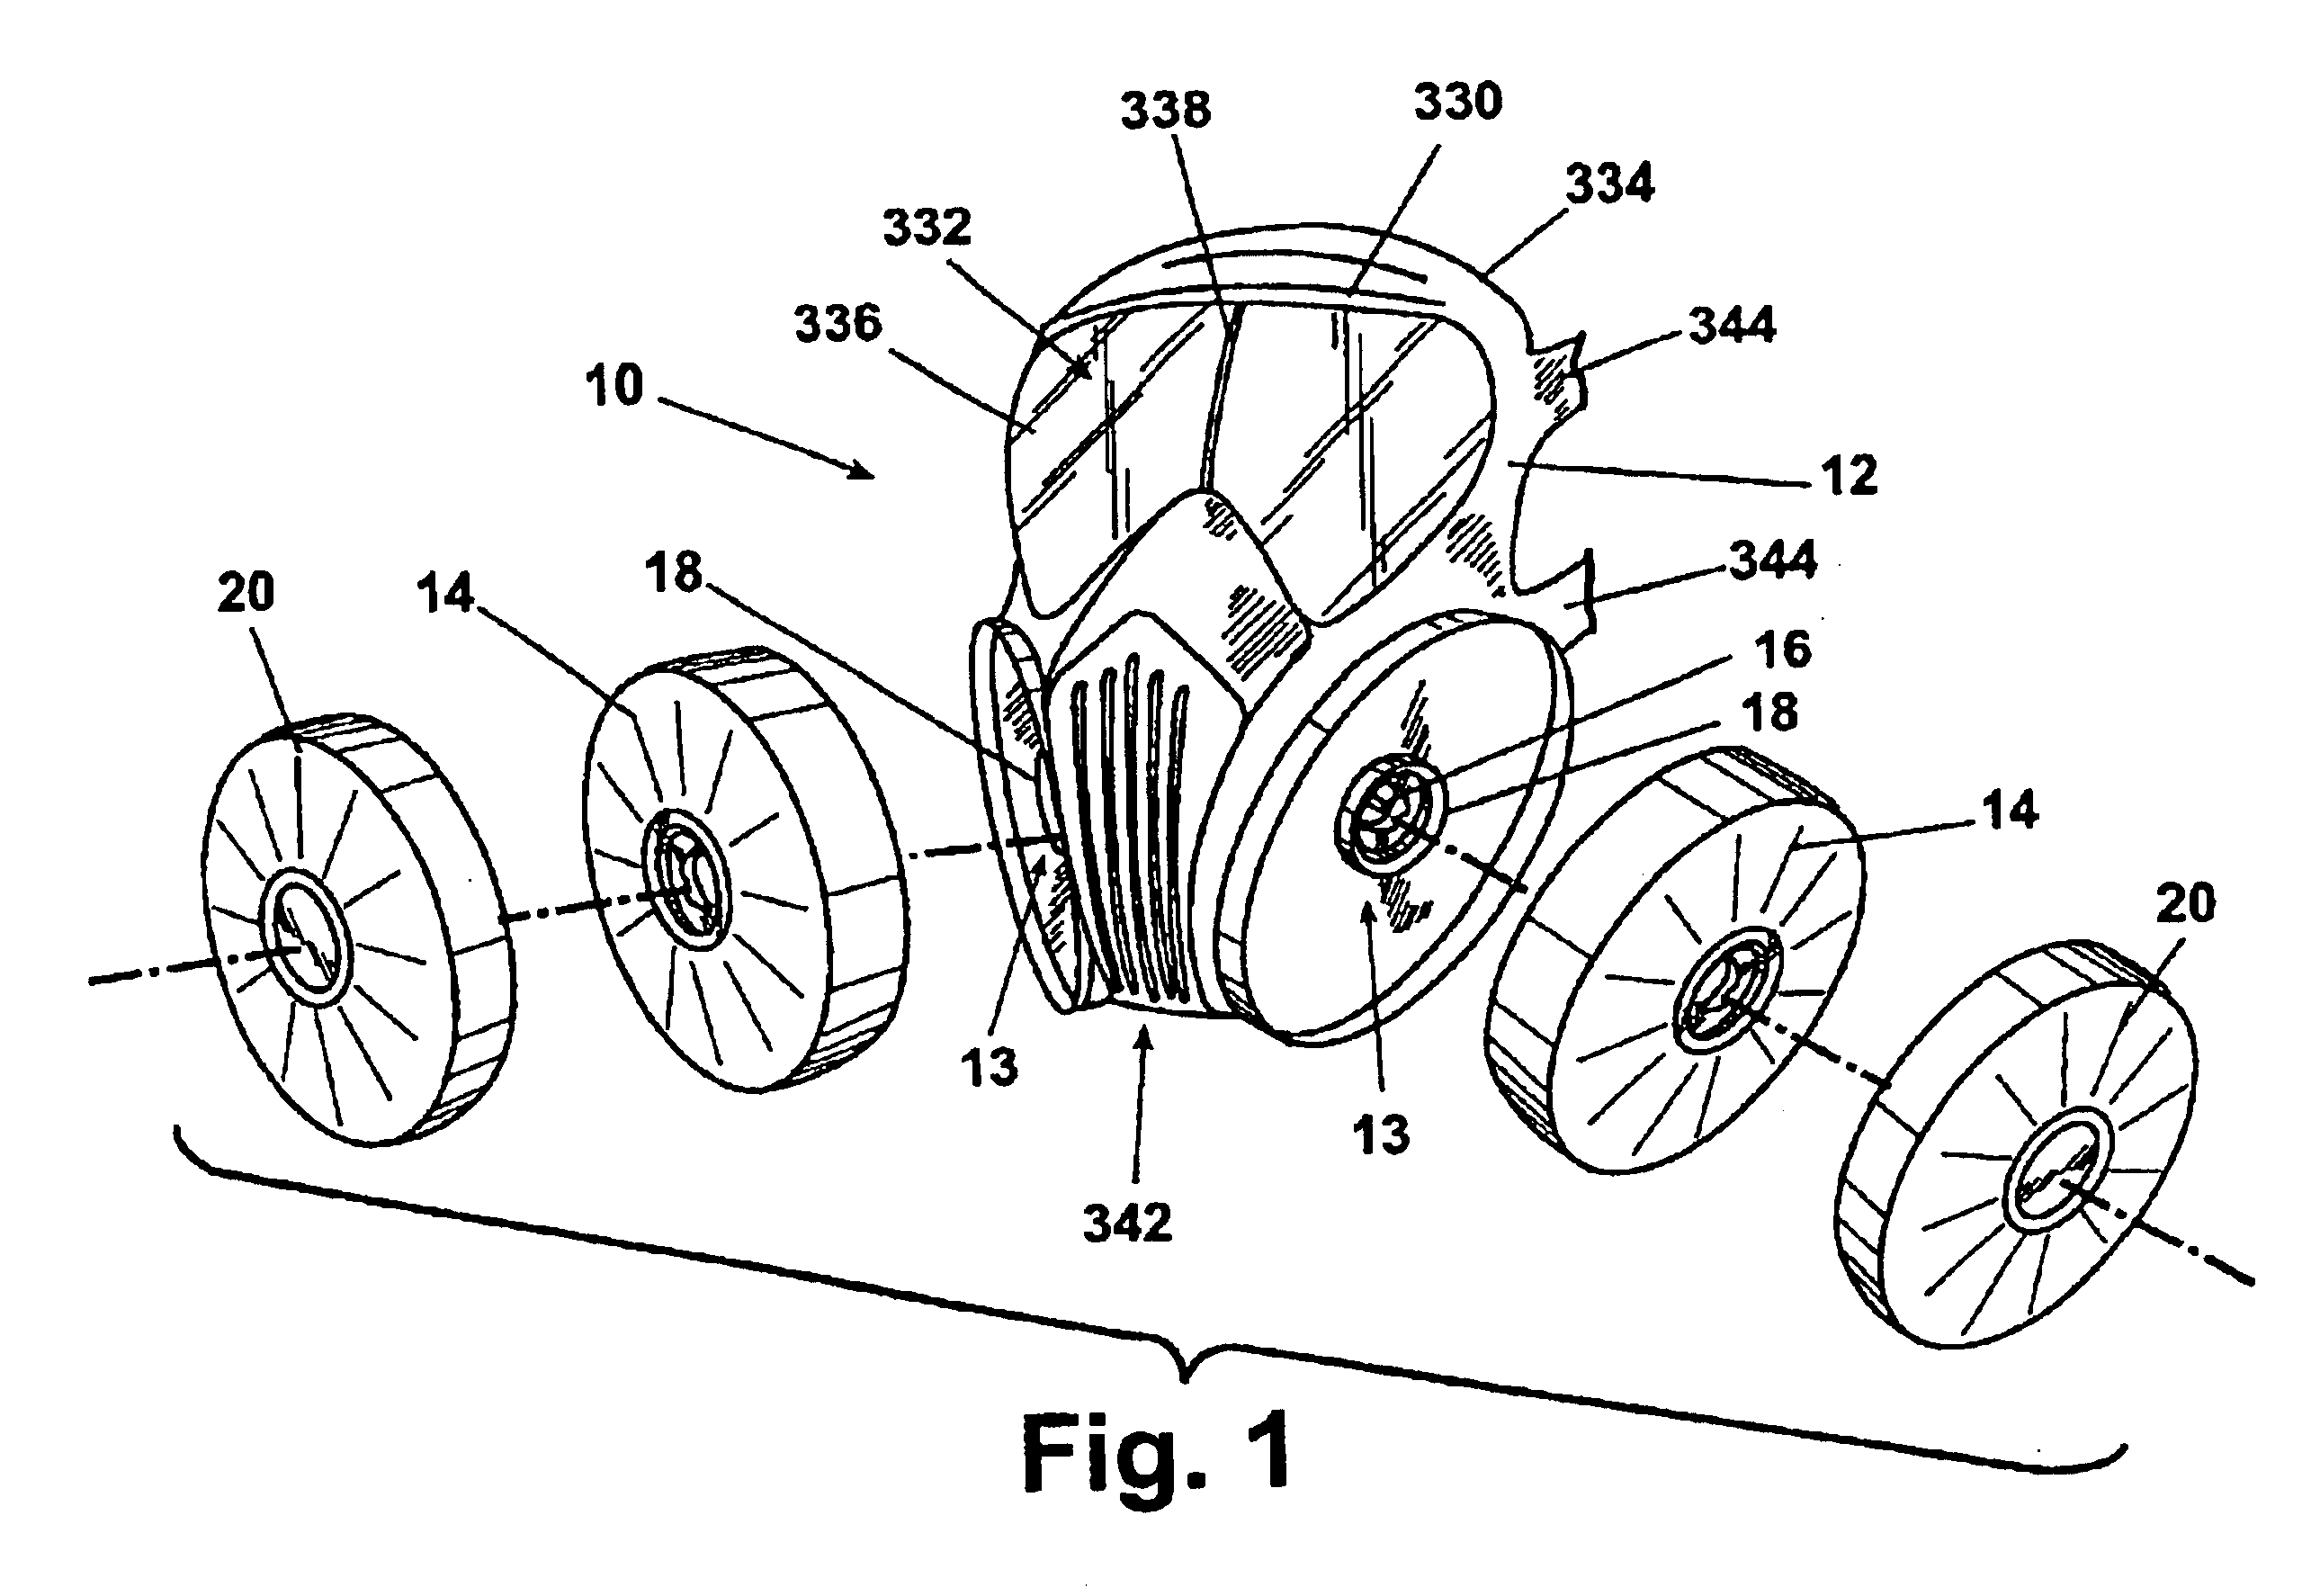 Self-sealing filter connection and gas mask filter assembly incorporating the same